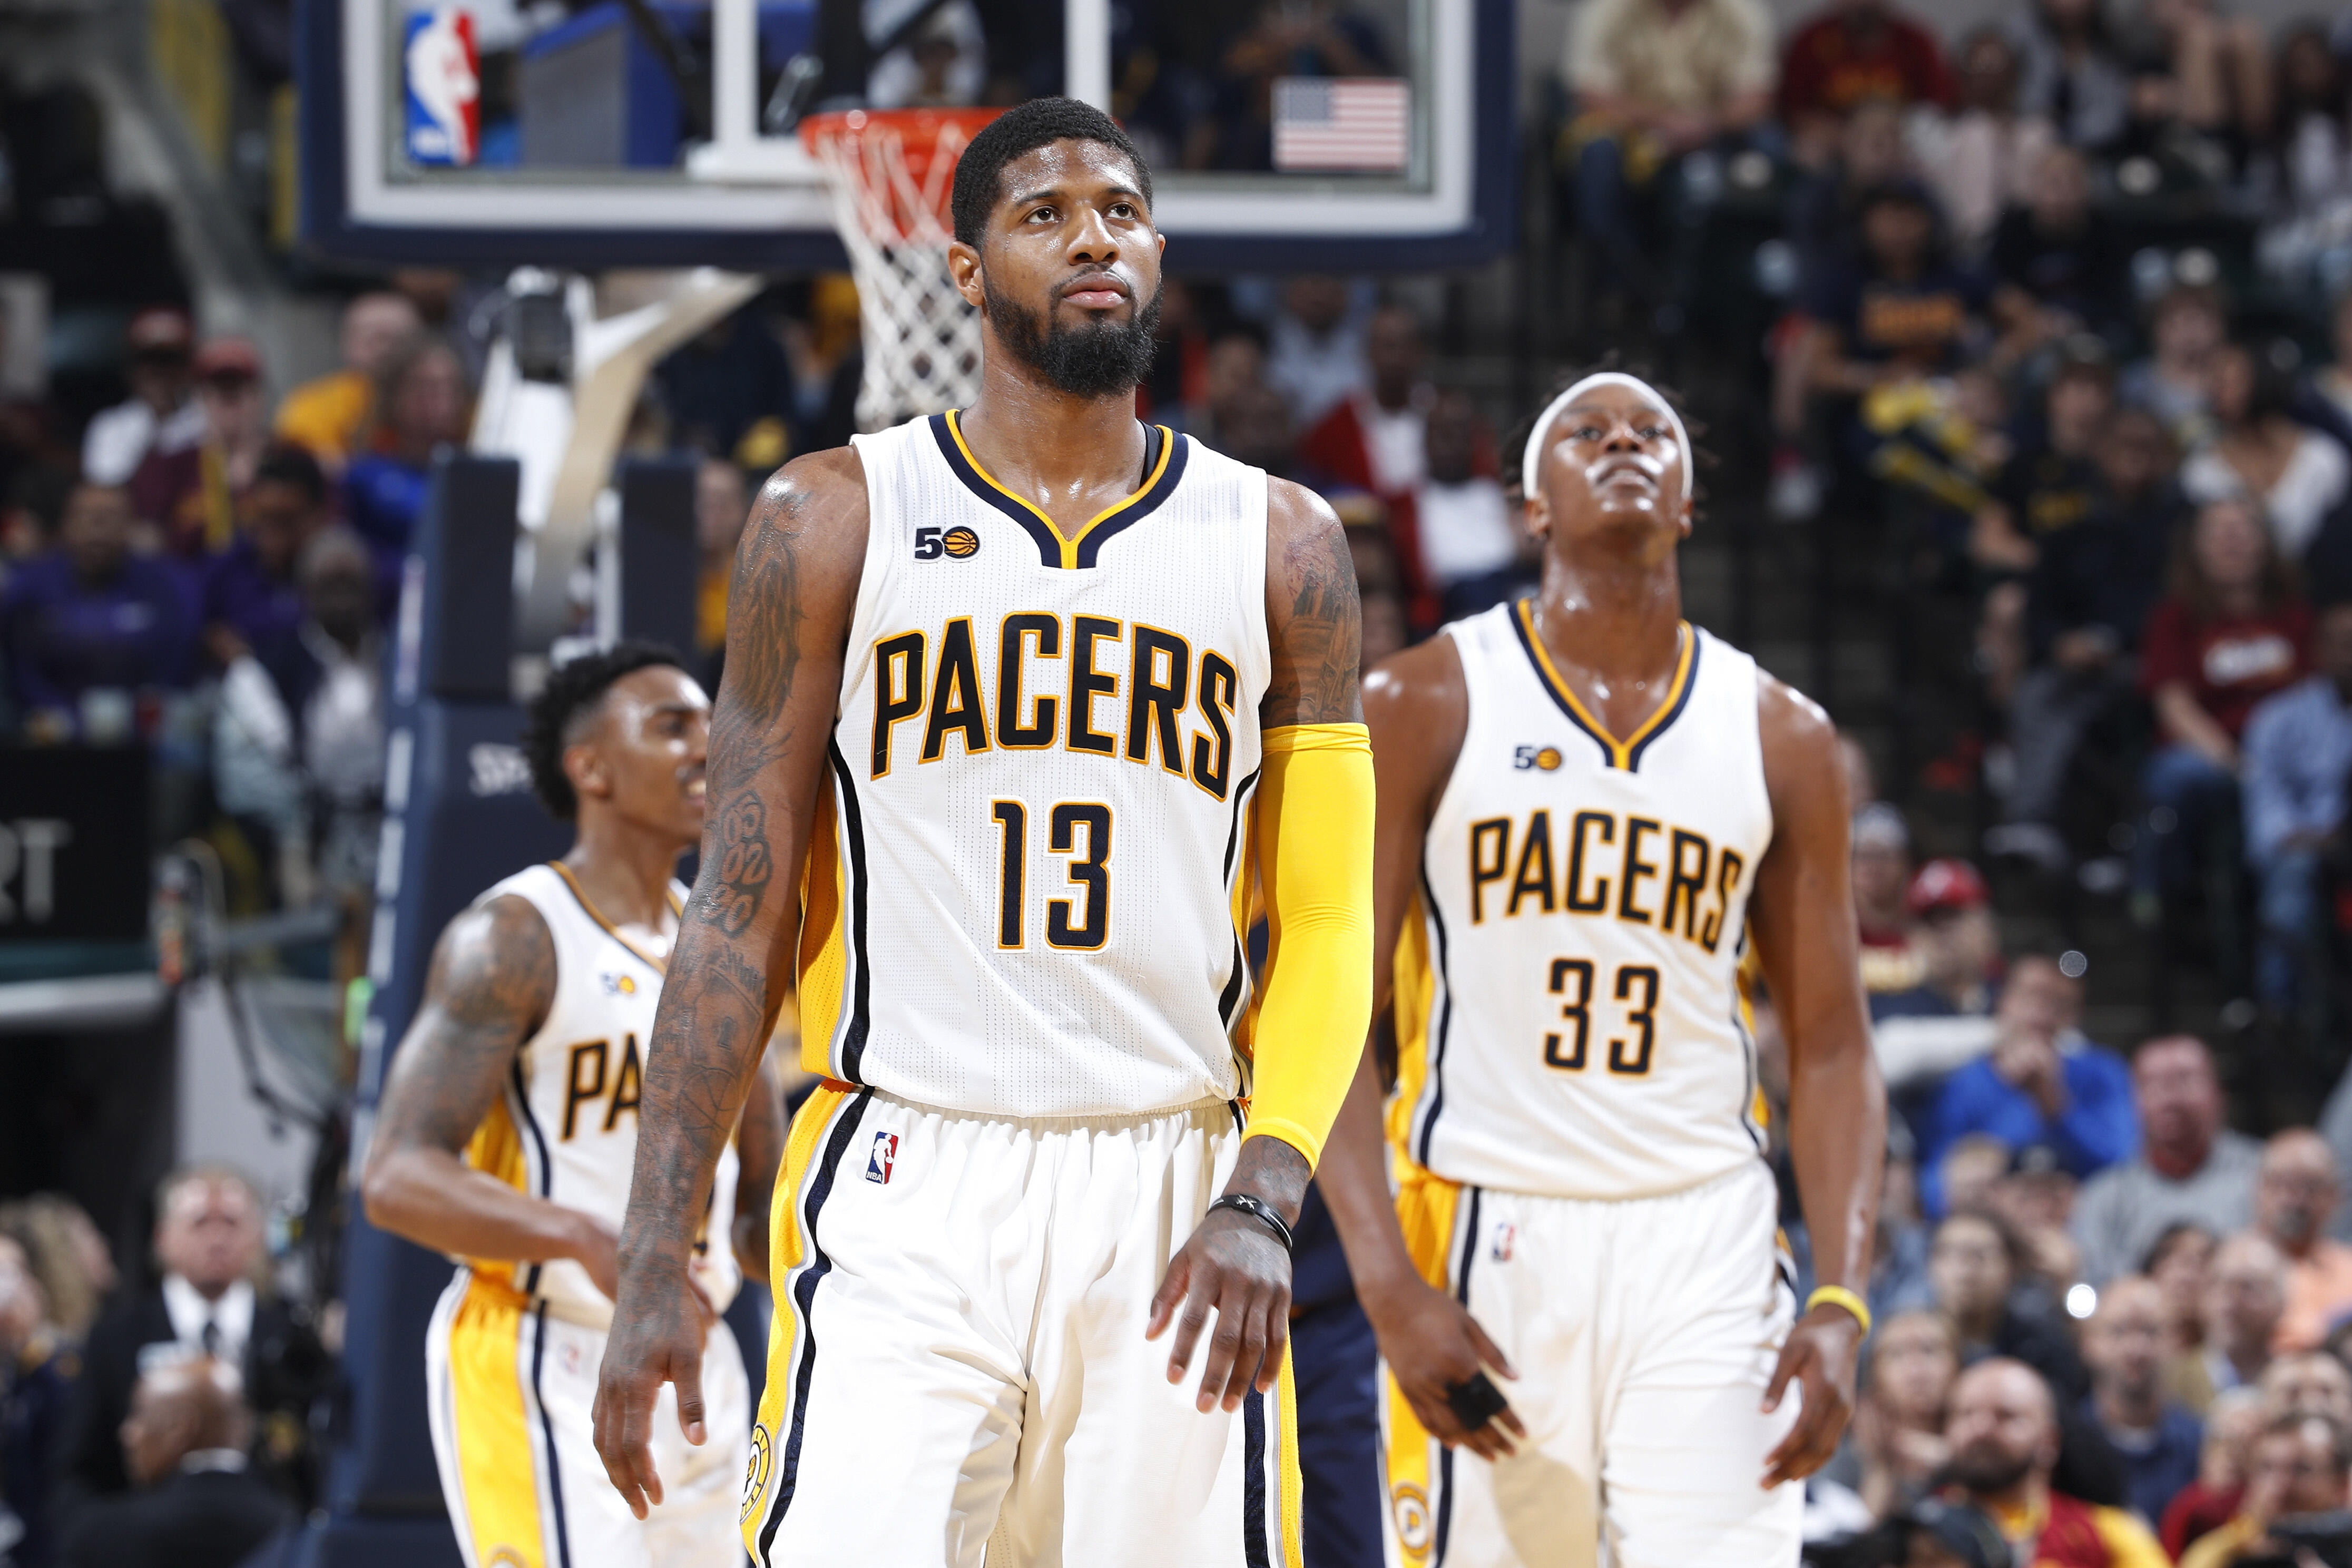 INDIANAPOLIS, IN - APRIL 23: Paul George #13 and Myles Turner #33 of the Indiana Pacers react in the second half of Game Four of the Eastern Conference Quarterfinals during the 2017 NBA Playoffs against the Cleveland Cavaliers at Bankers Life Fieldhouse o